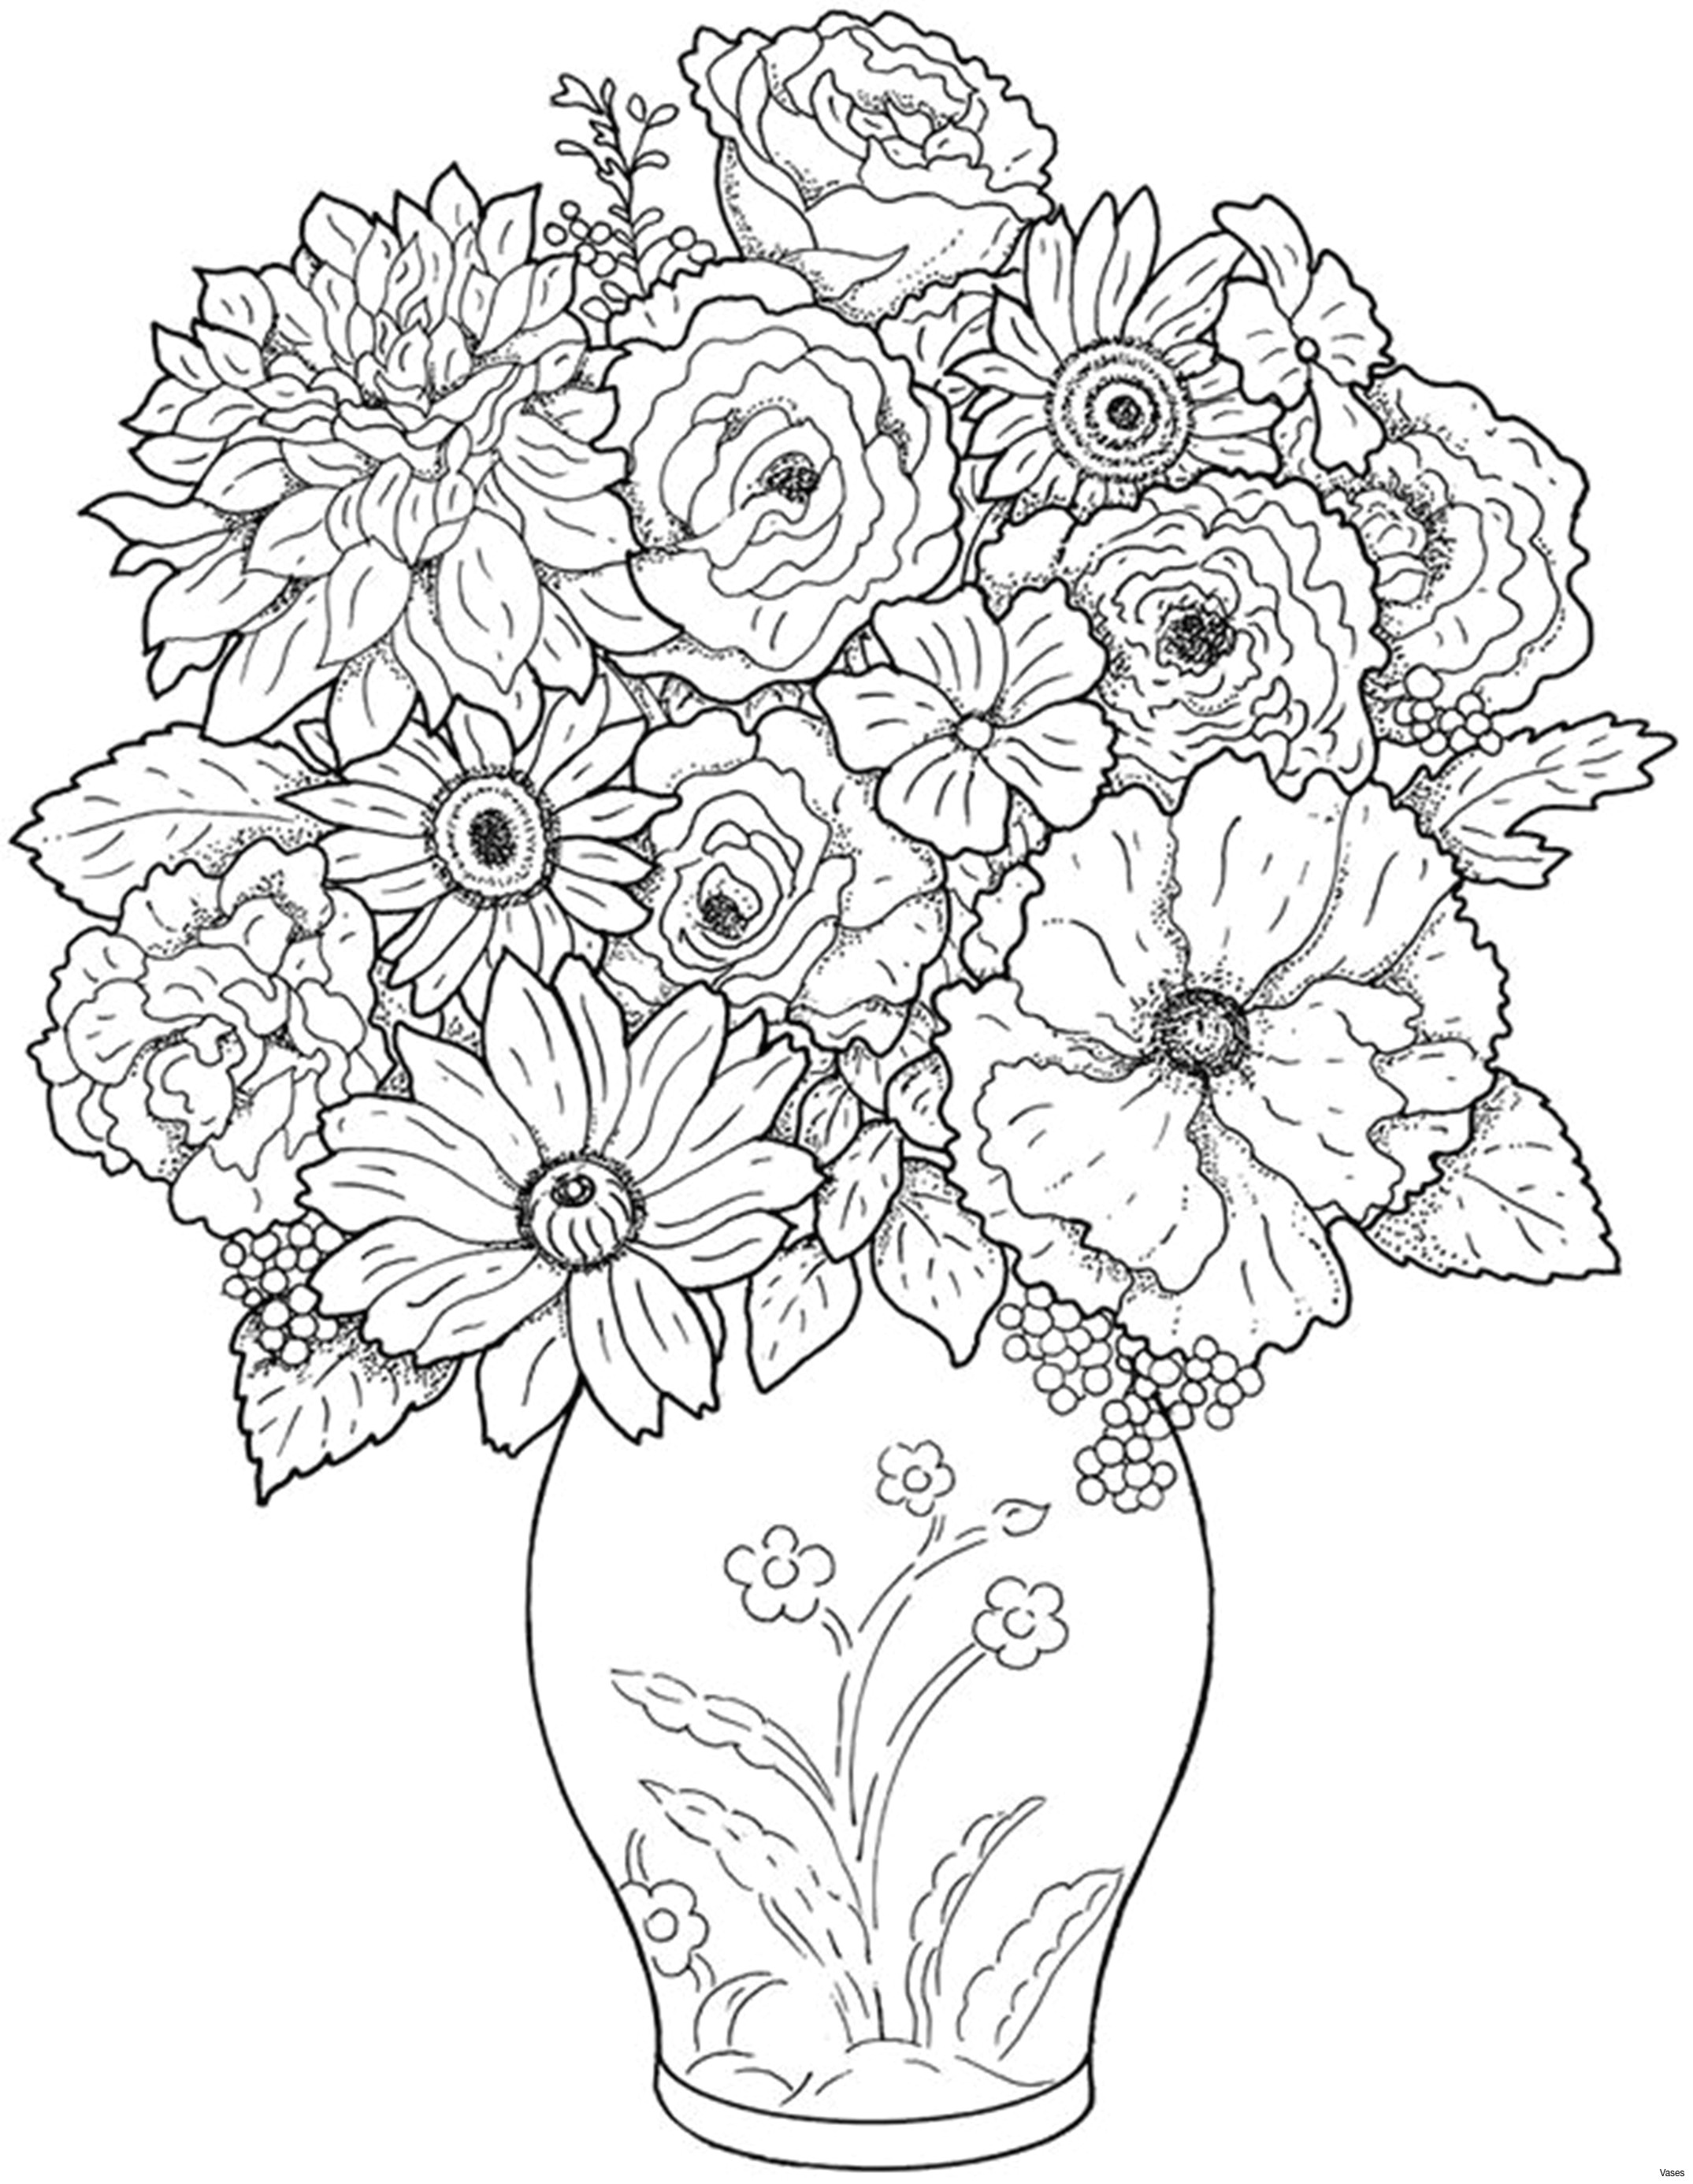 Drawings Of Flowers In Black and White Www Colouring Pages Aua Ergewohnliche Cool Vases Flower Vase Coloring